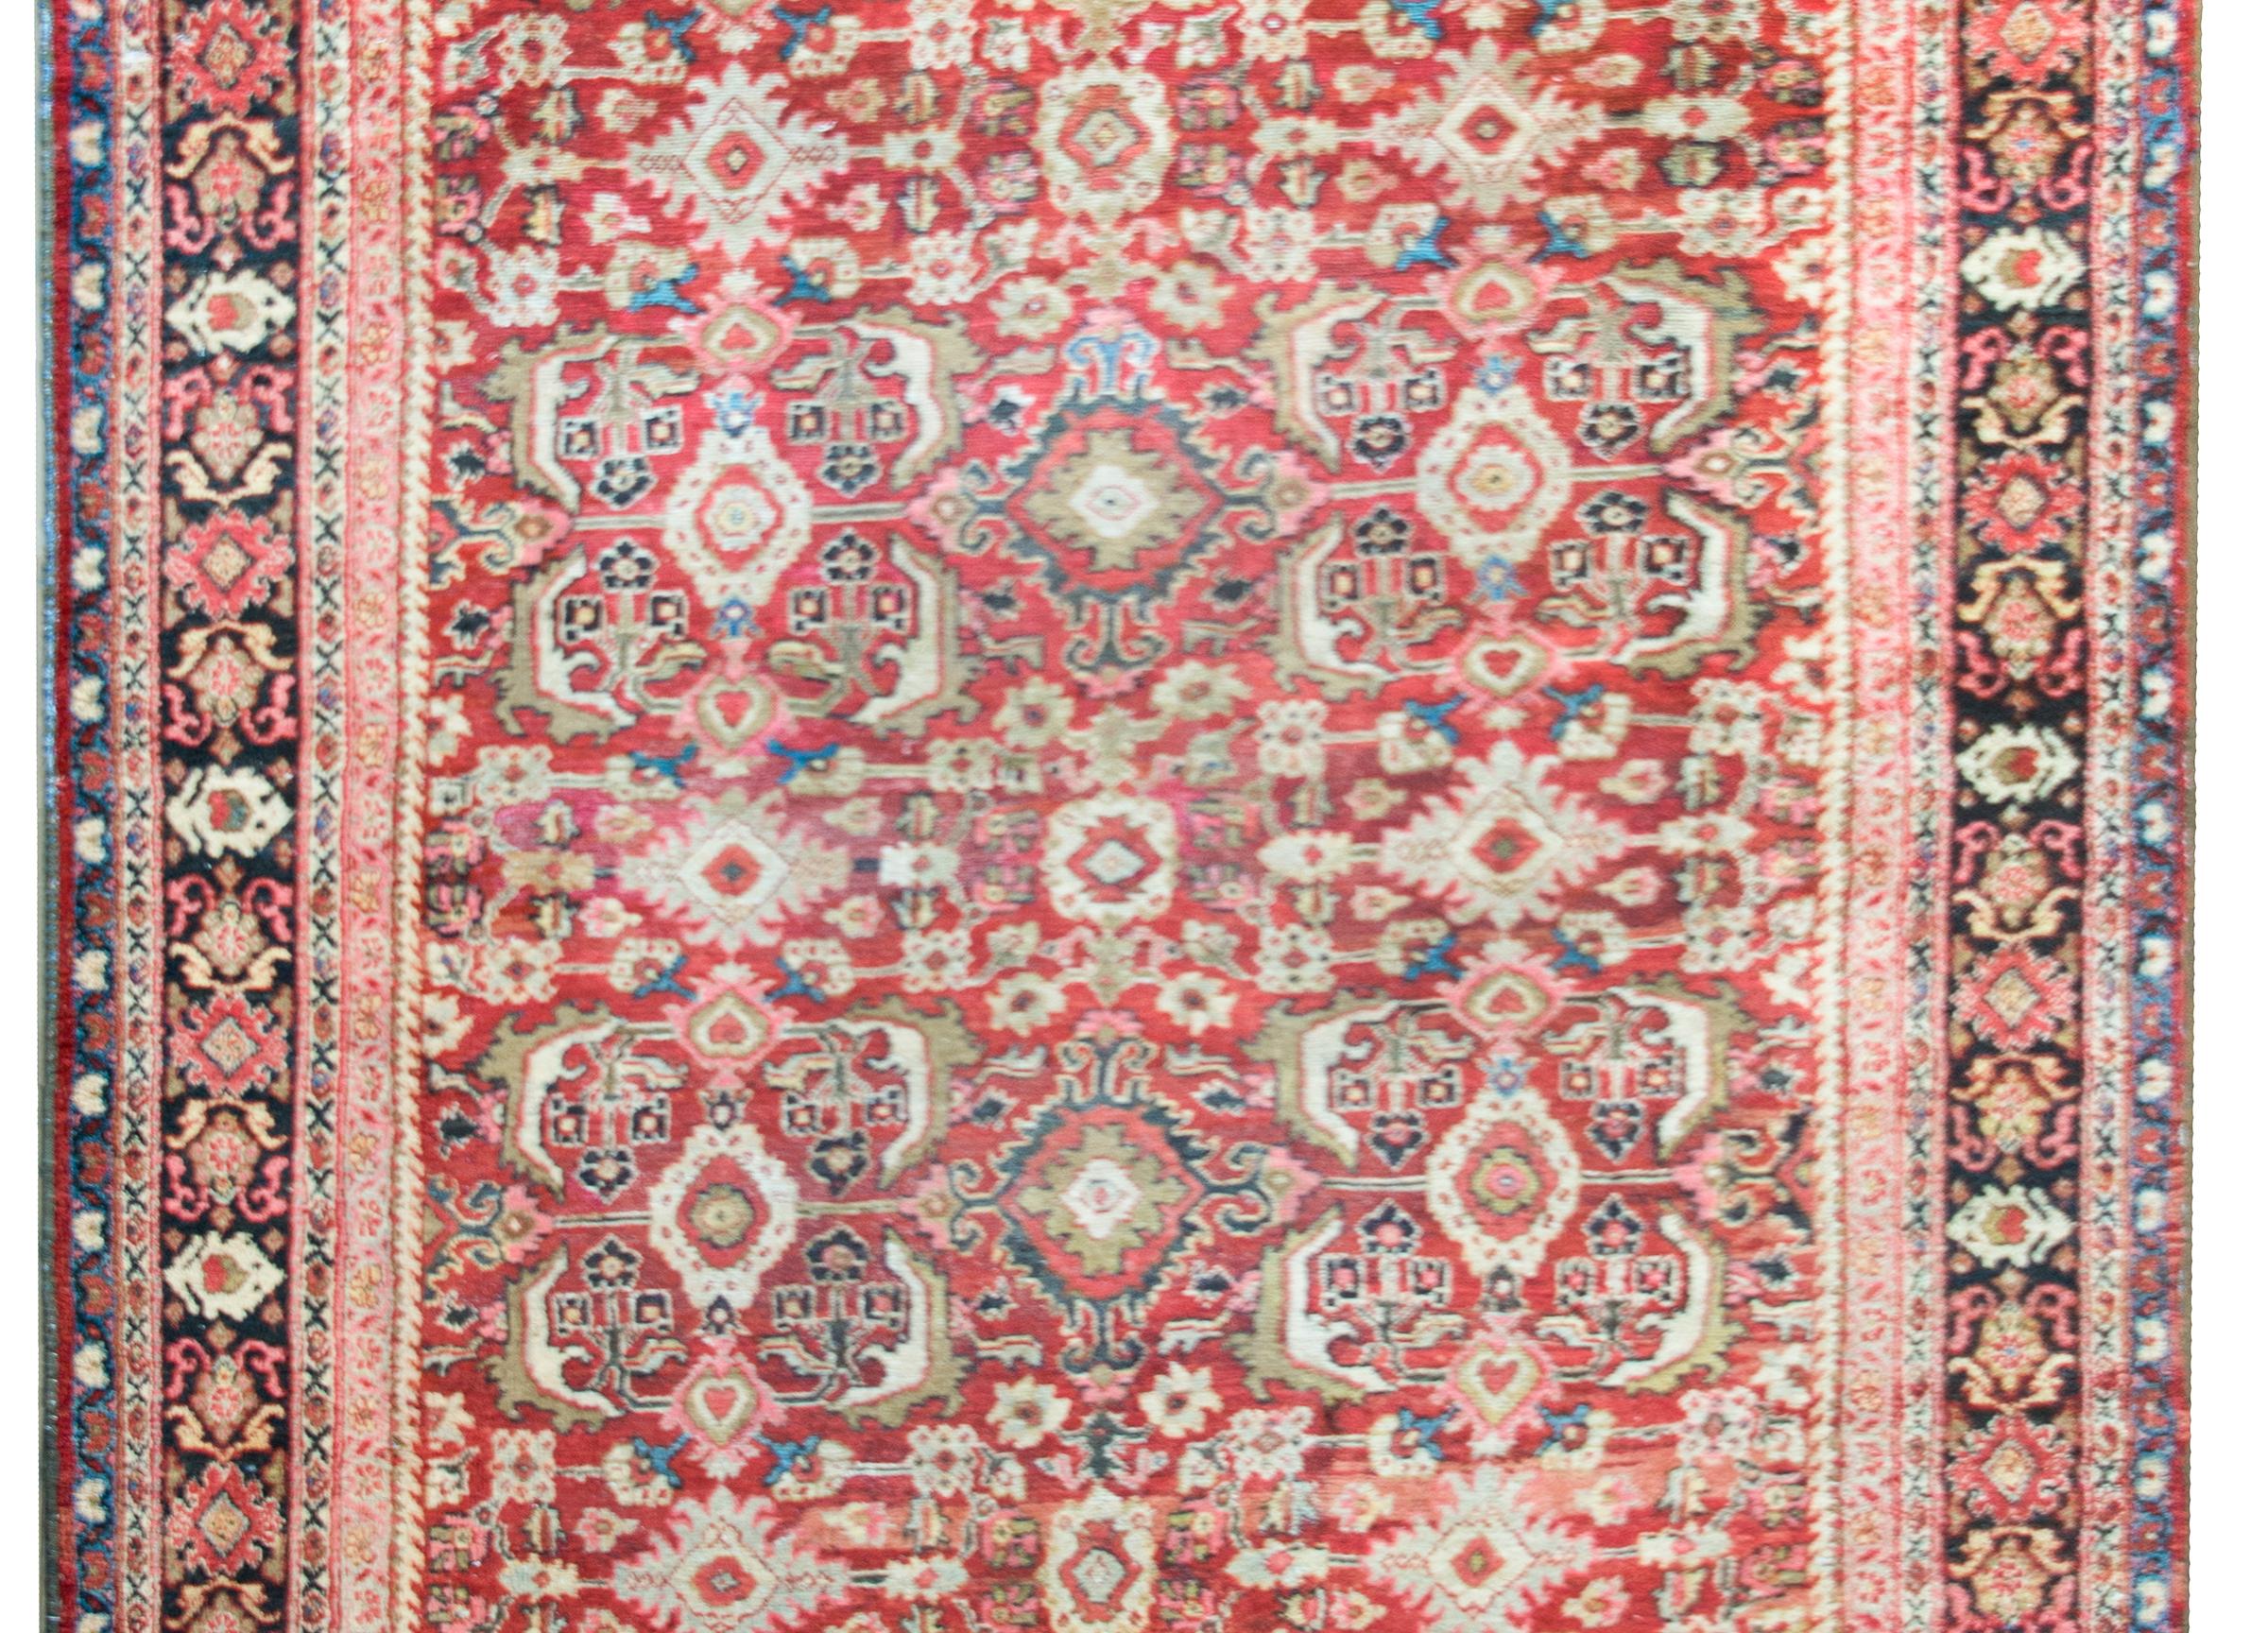 A stunning early 20th century Persian Meshkabad rug with an all-over floral pattern containing myriad large-scale flowers, leaves, and scrolling vines, and all surrounded by several floral patterned striped.